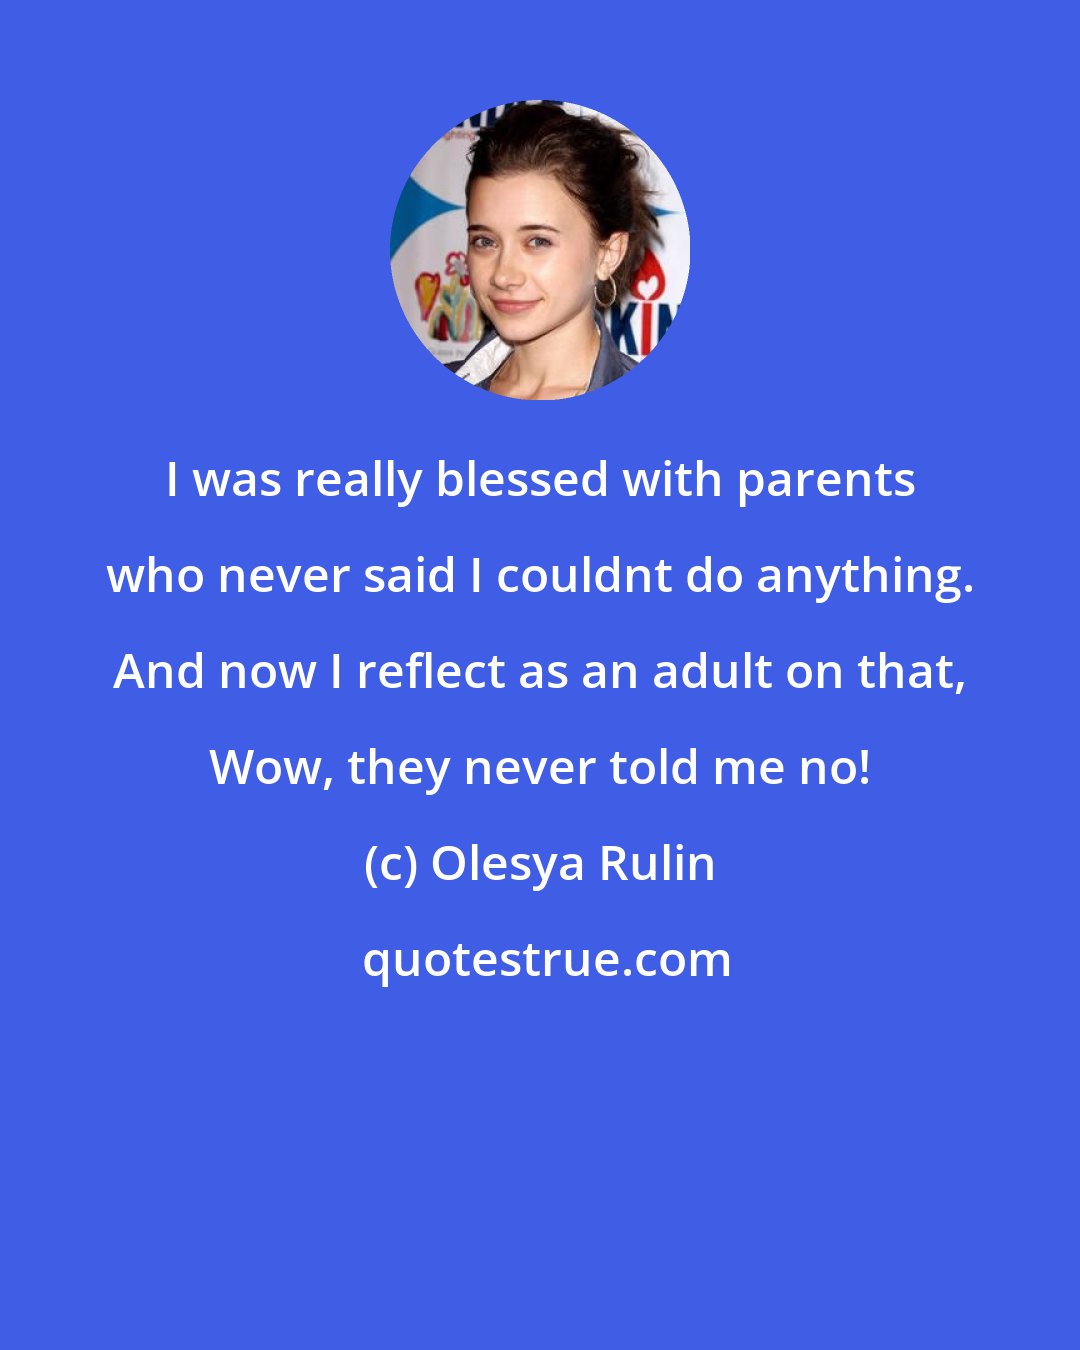 Olesya Rulin: I was really blessed with parents who never said I couldnt do anything. And now I reflect as an adult on that, Wow, they never told me no!